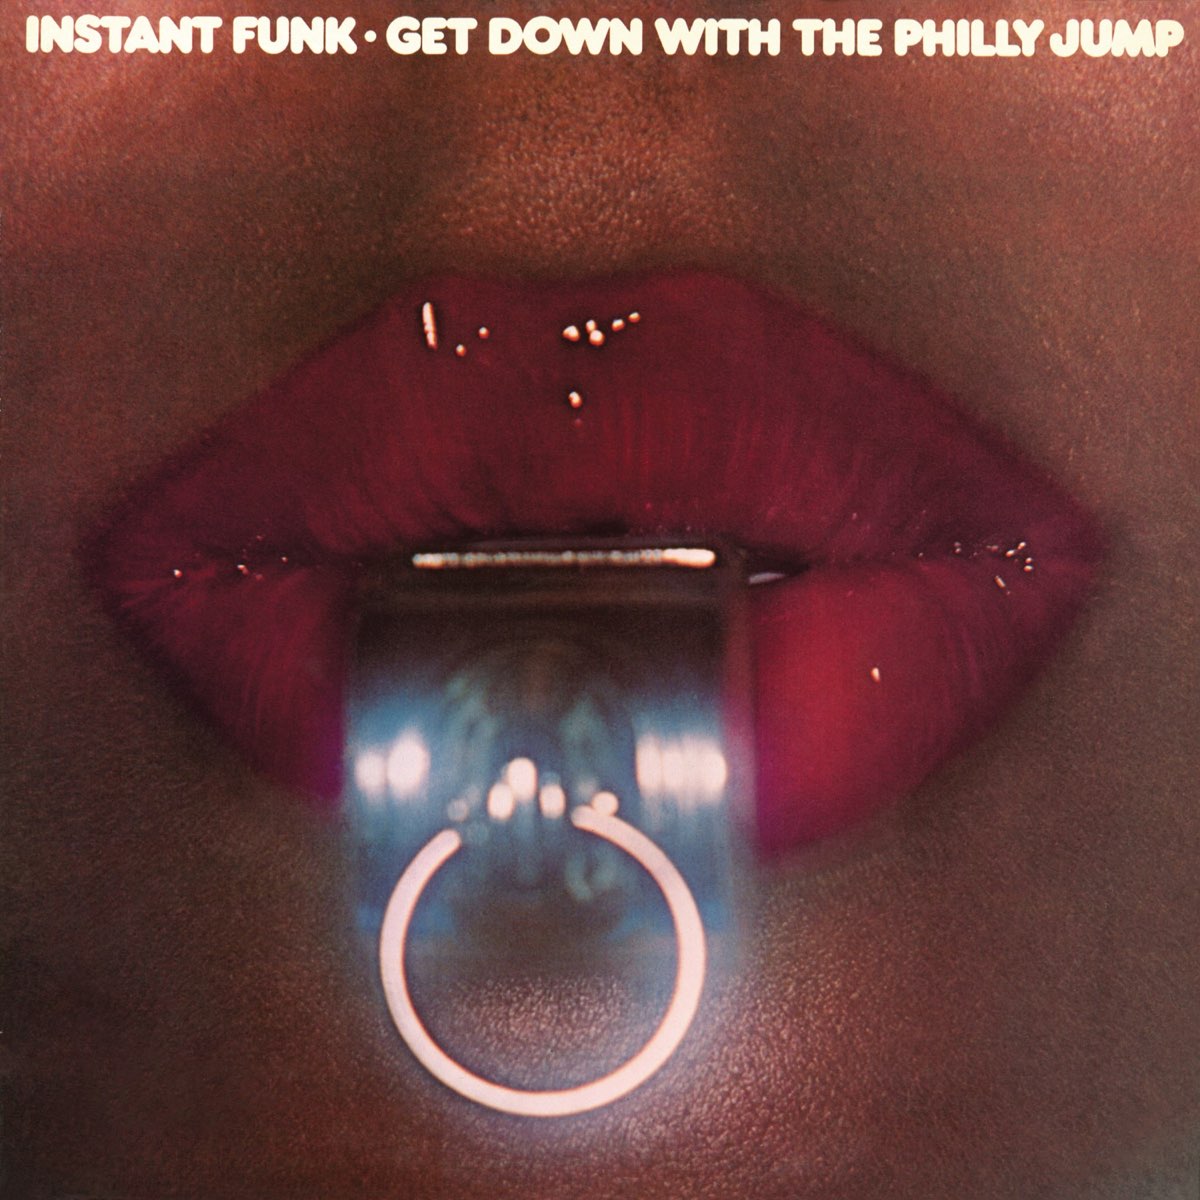 Get get down slowed. Instant Funk. Funk down. Get down with. One last Funk.